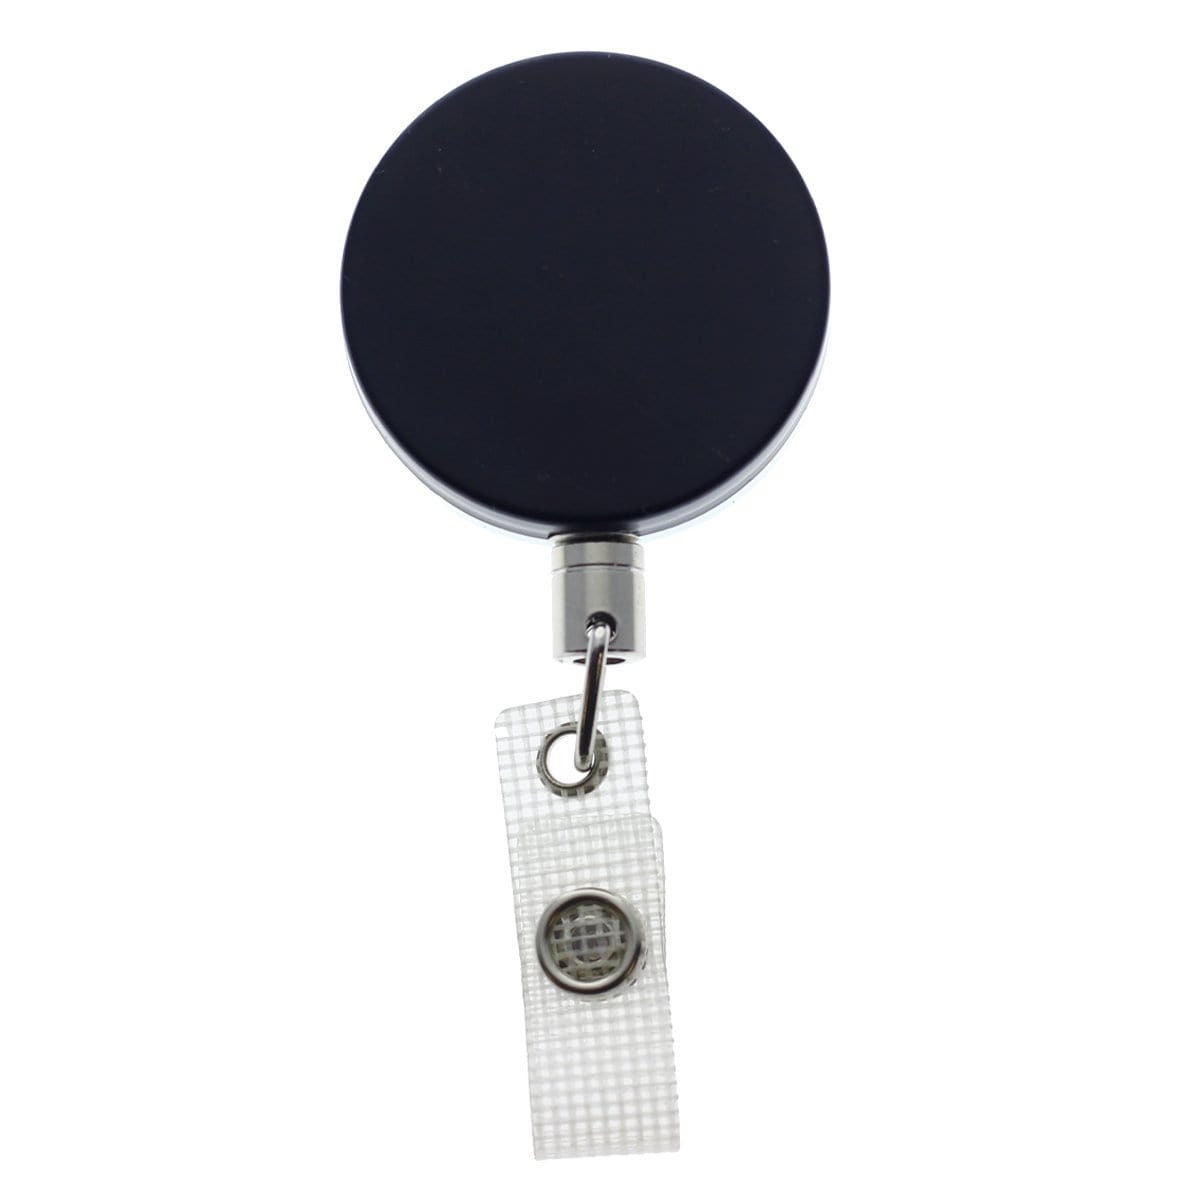 Retractable Badge Reel with Steel Chain Link Cable - ! - Heavy Duty Metal Badge Holder with Belt Clip & Vinyl Strap for ID and Keys